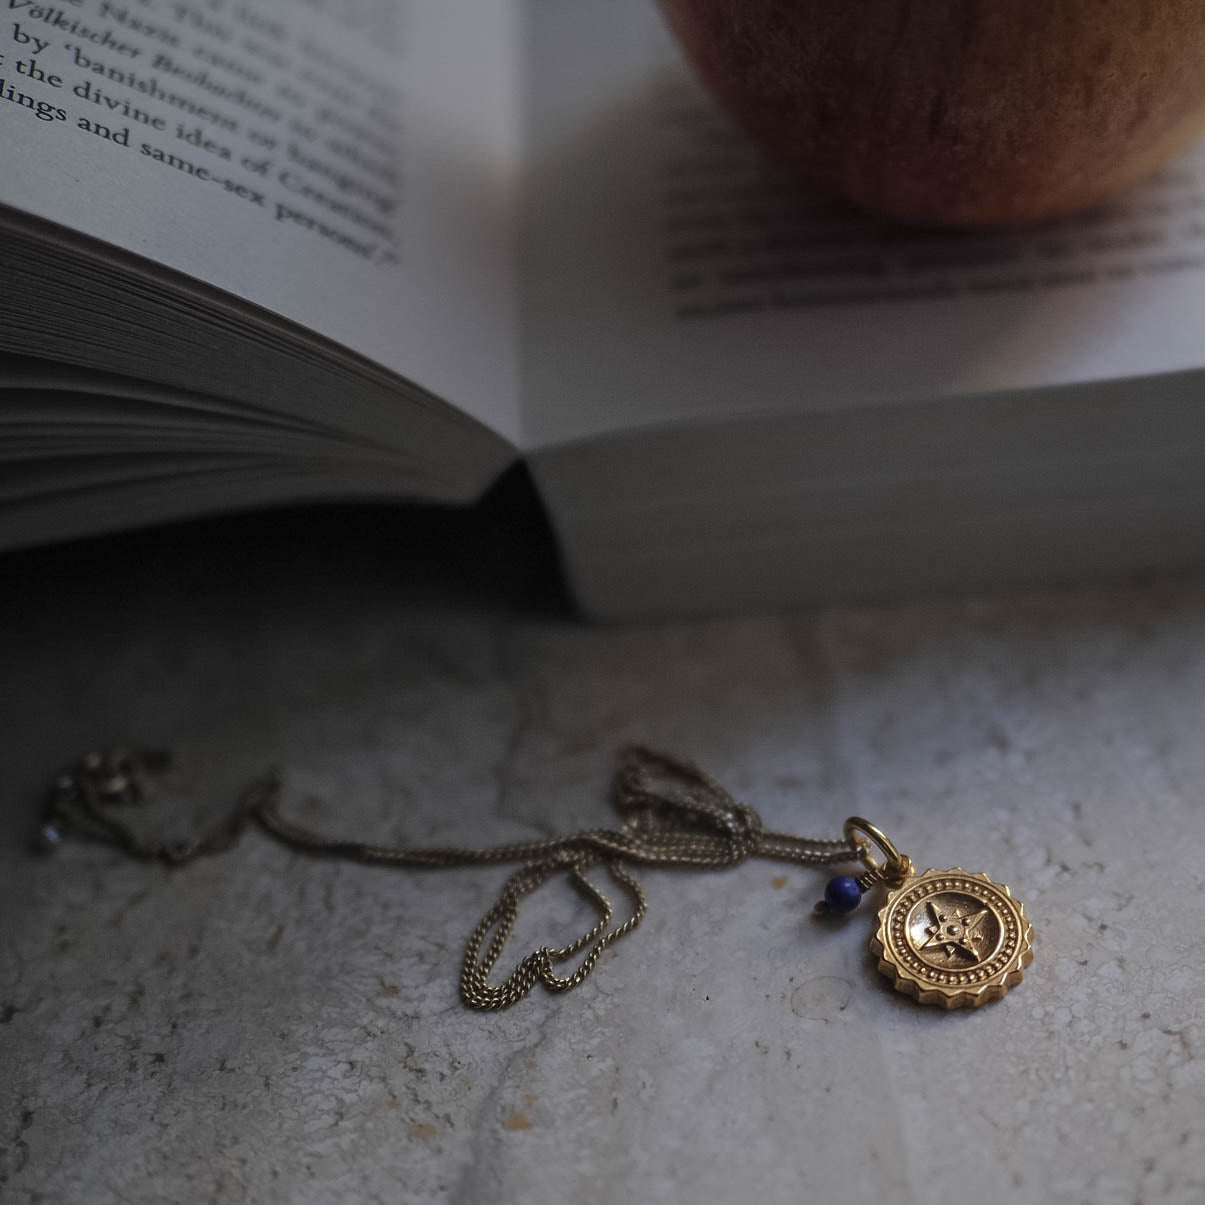 Bianca Jones Compass Midi Necklace with Lapis Lazuli: A gift of guidance and protection for adventurers, enhancing joy and vitality on their journey.